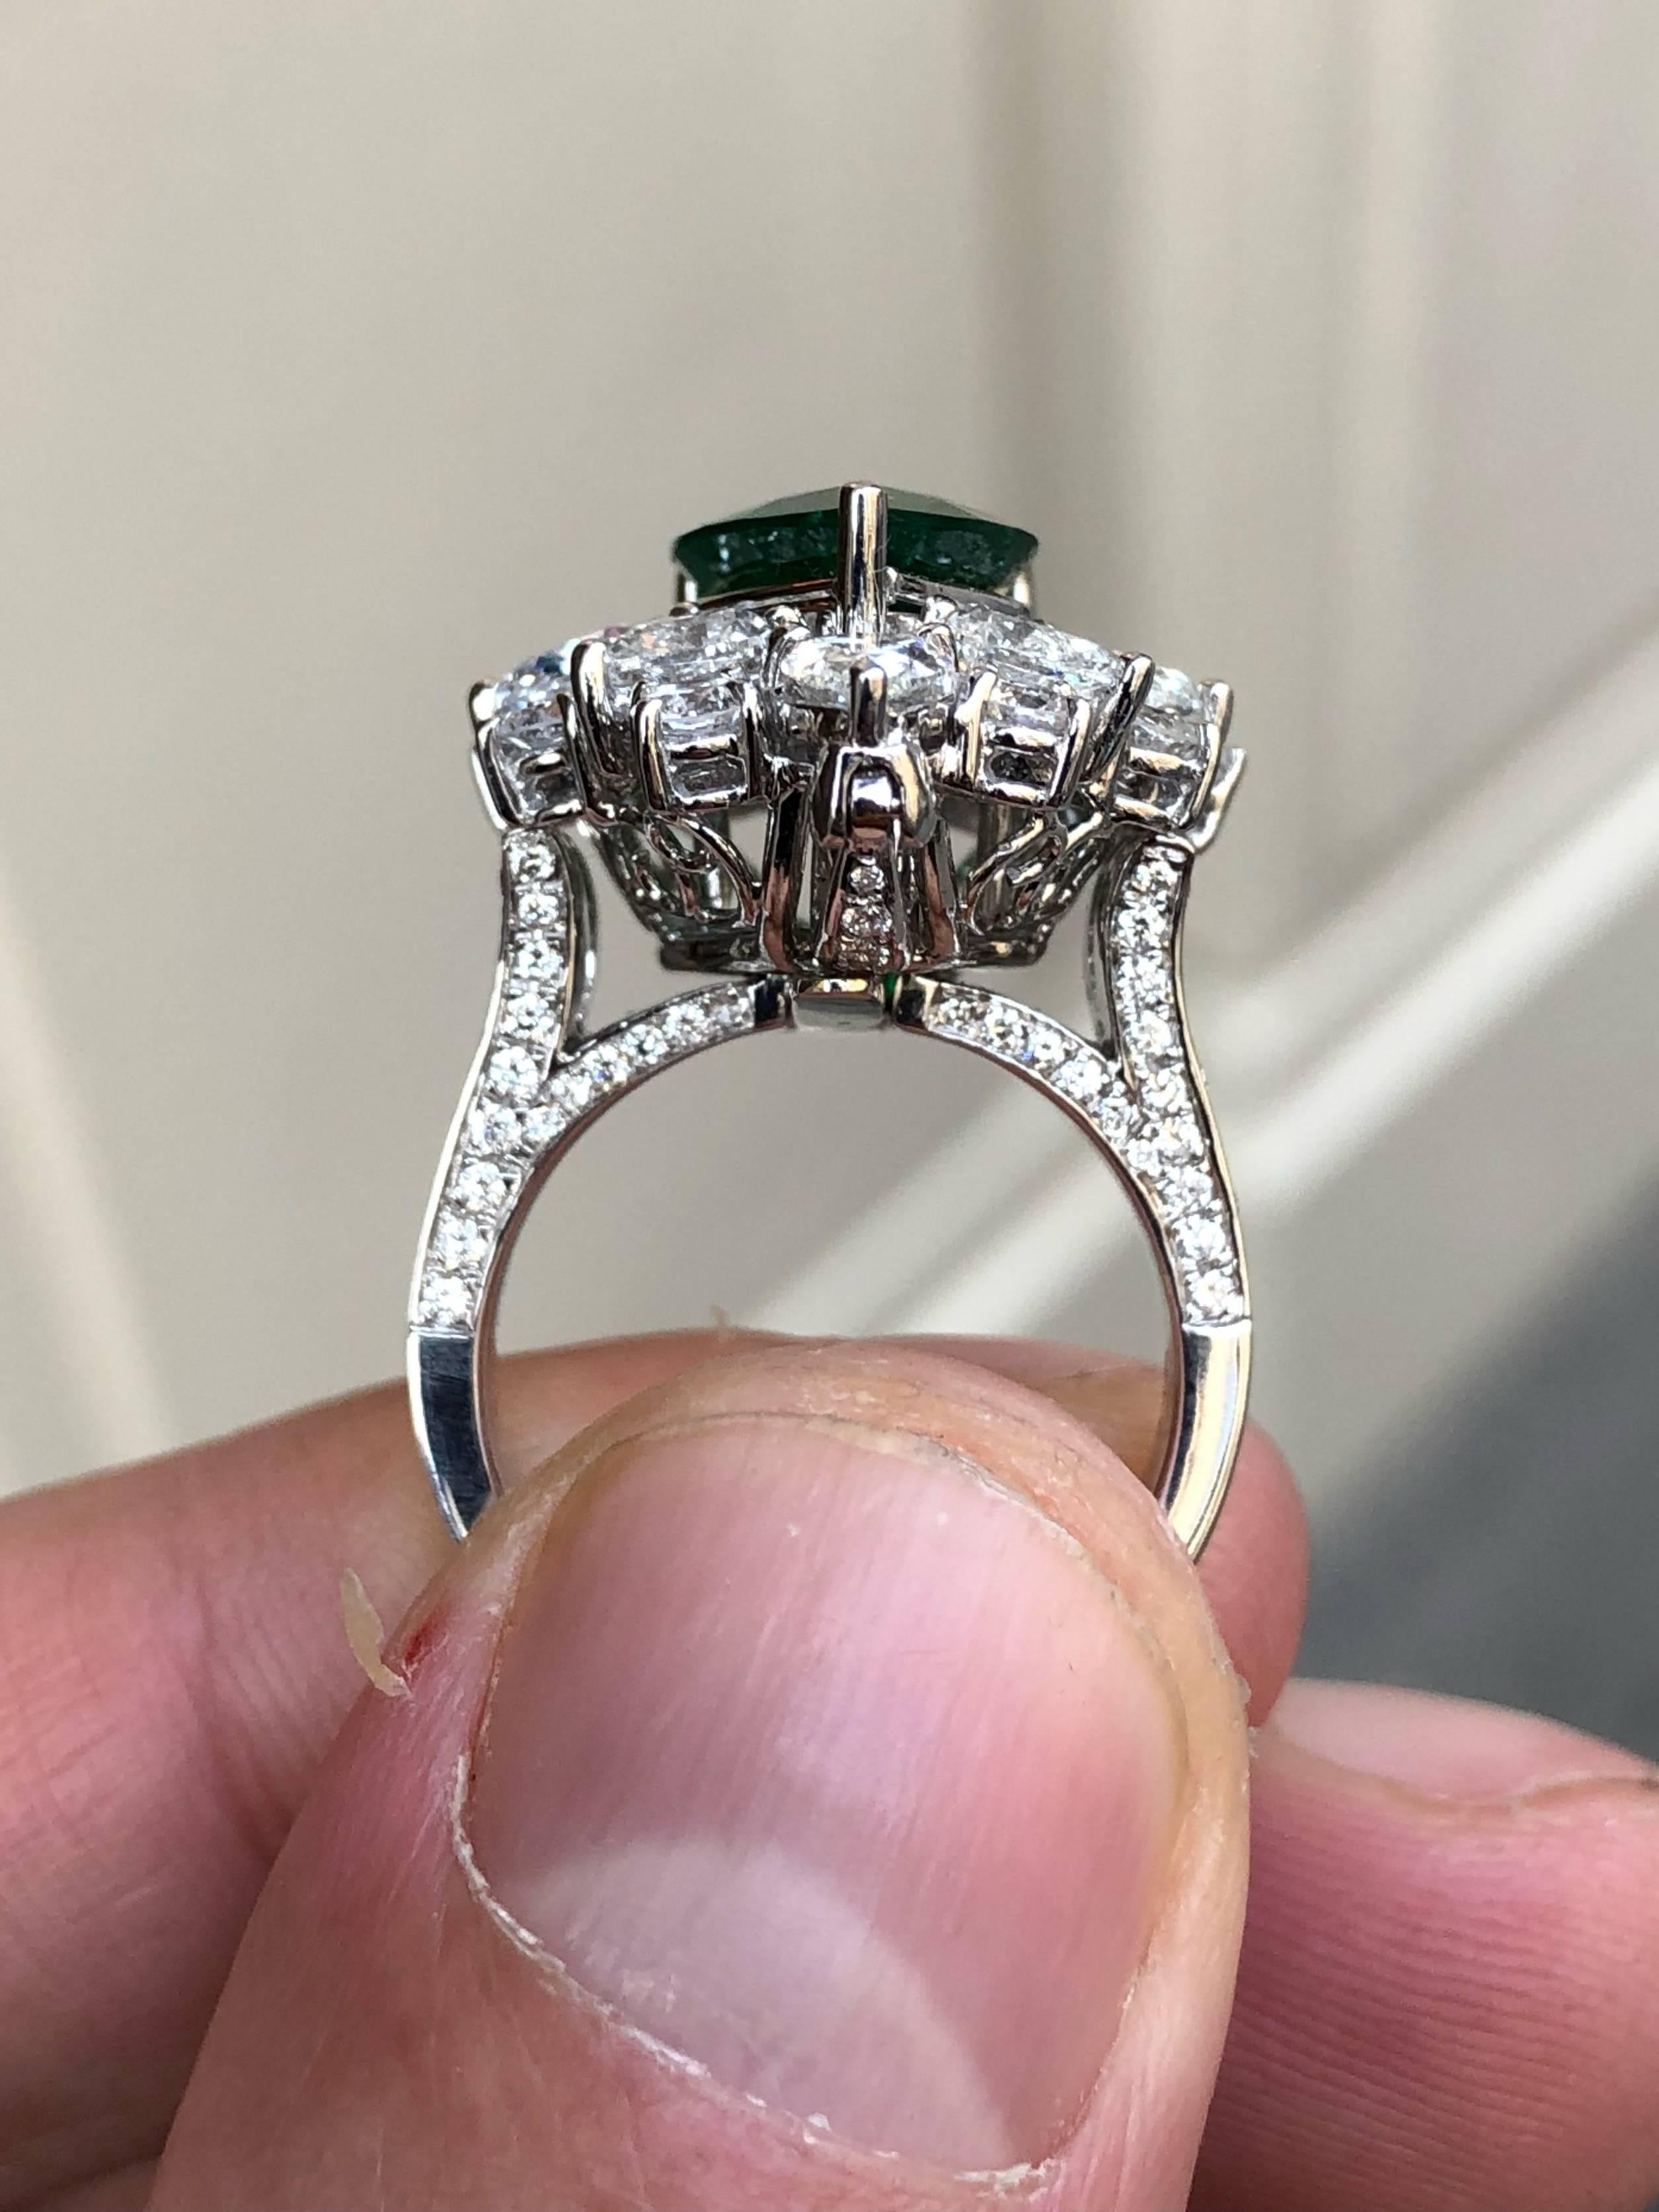 This fine pear cut Muzo emerald ring weighing 3.95 carats is certified by the world renowned Gübelin Gem Lab, Lucerne, Switzerland.  It is encrusted with certified E colour diamonds and the shank is detachable so that the piece may also be worn as a